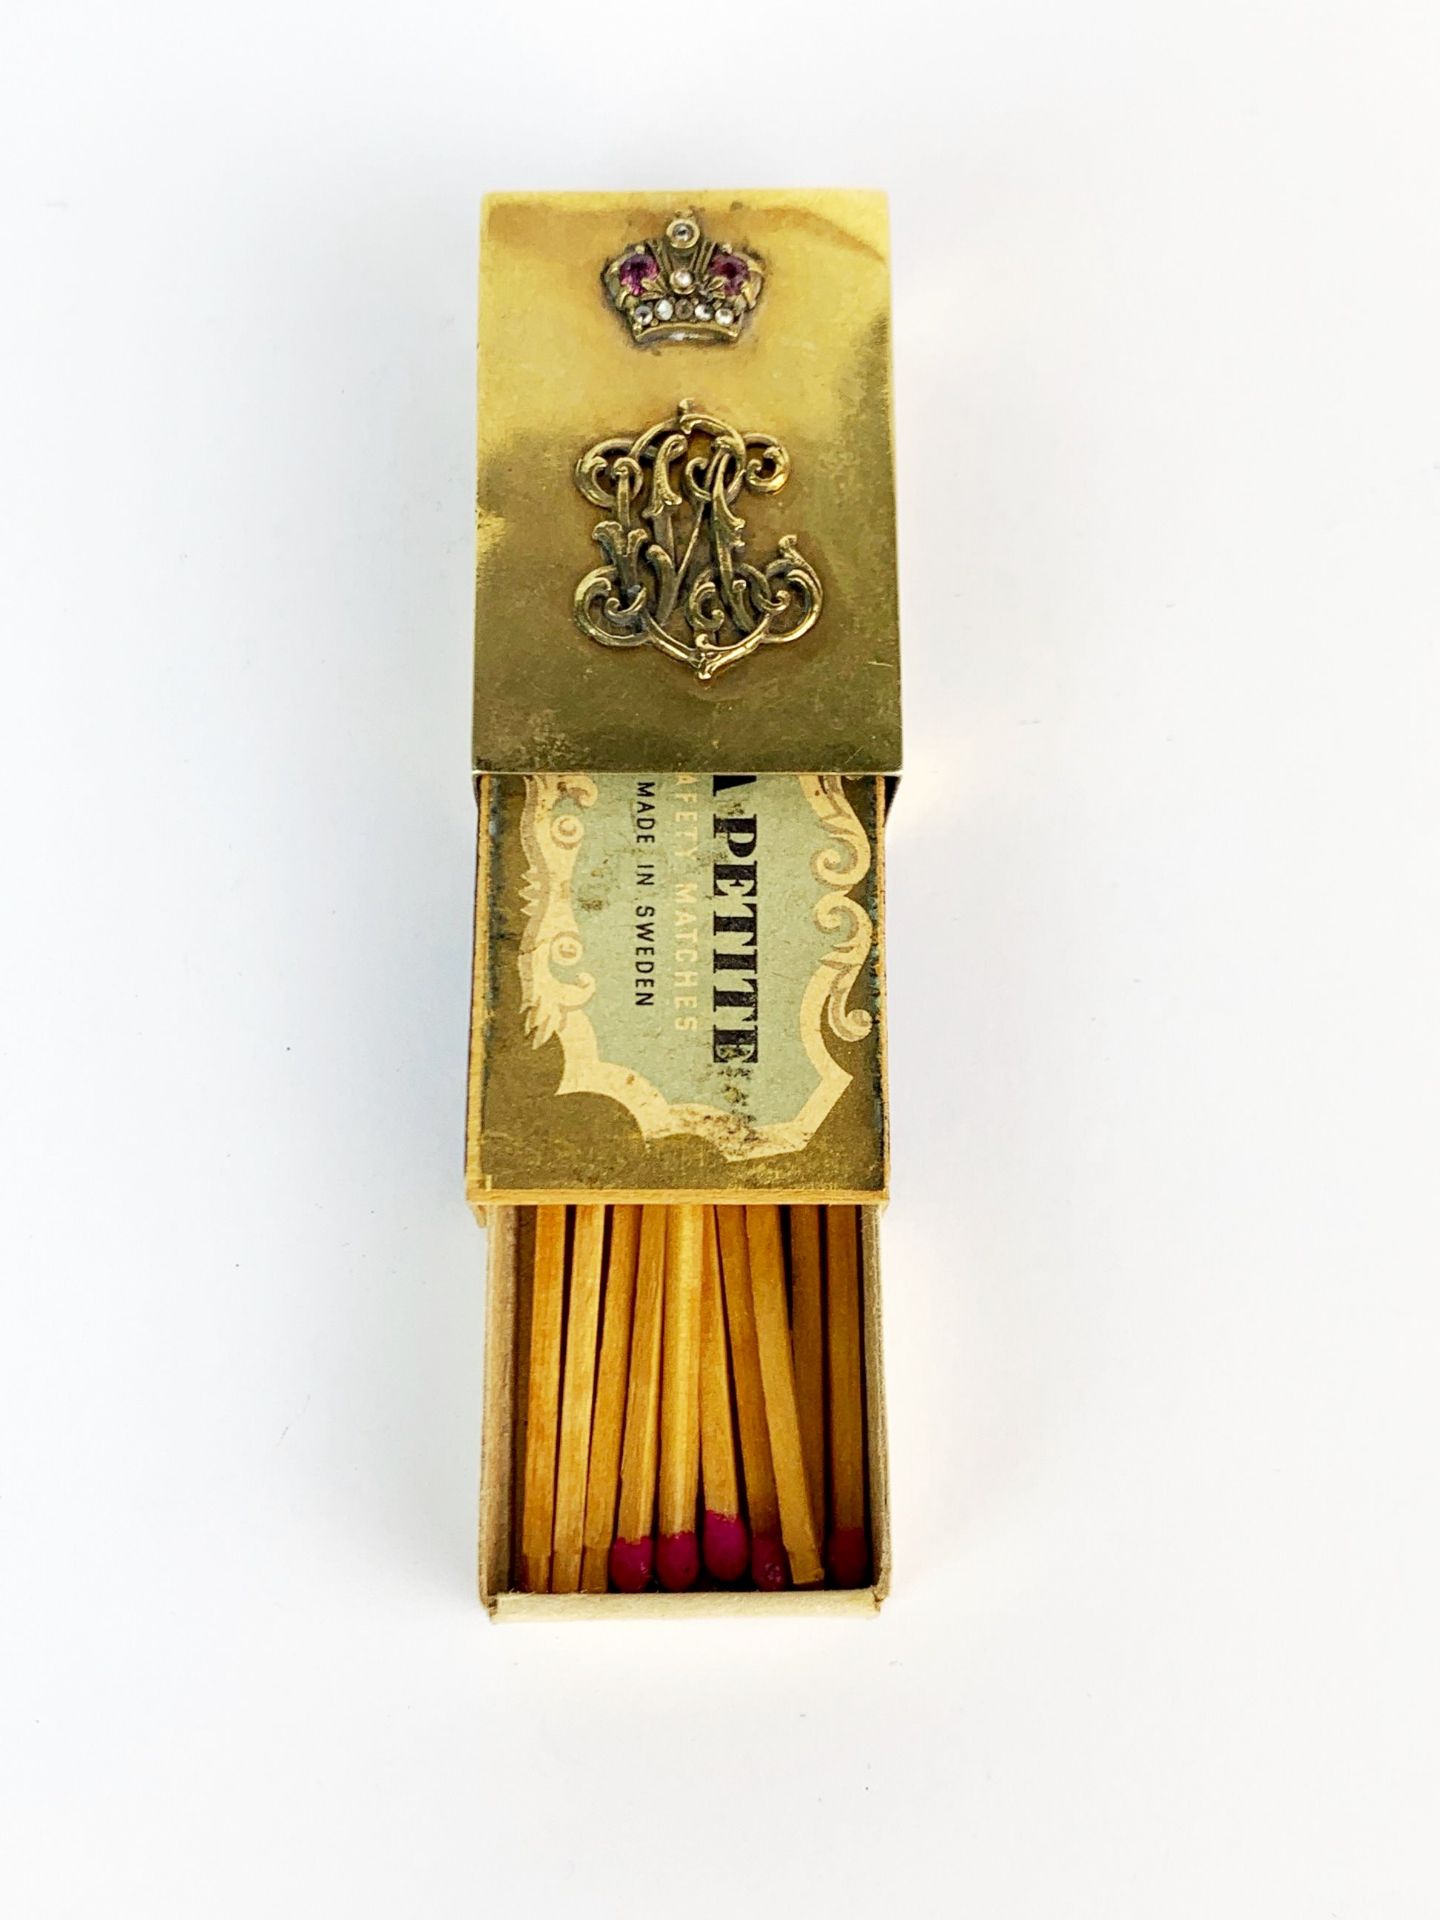 A Russian silver gilt and enamel matchbox cover set with rubies and diamonds, 4.1 x 2.8 x 1.5cm. - Image 2 of 4